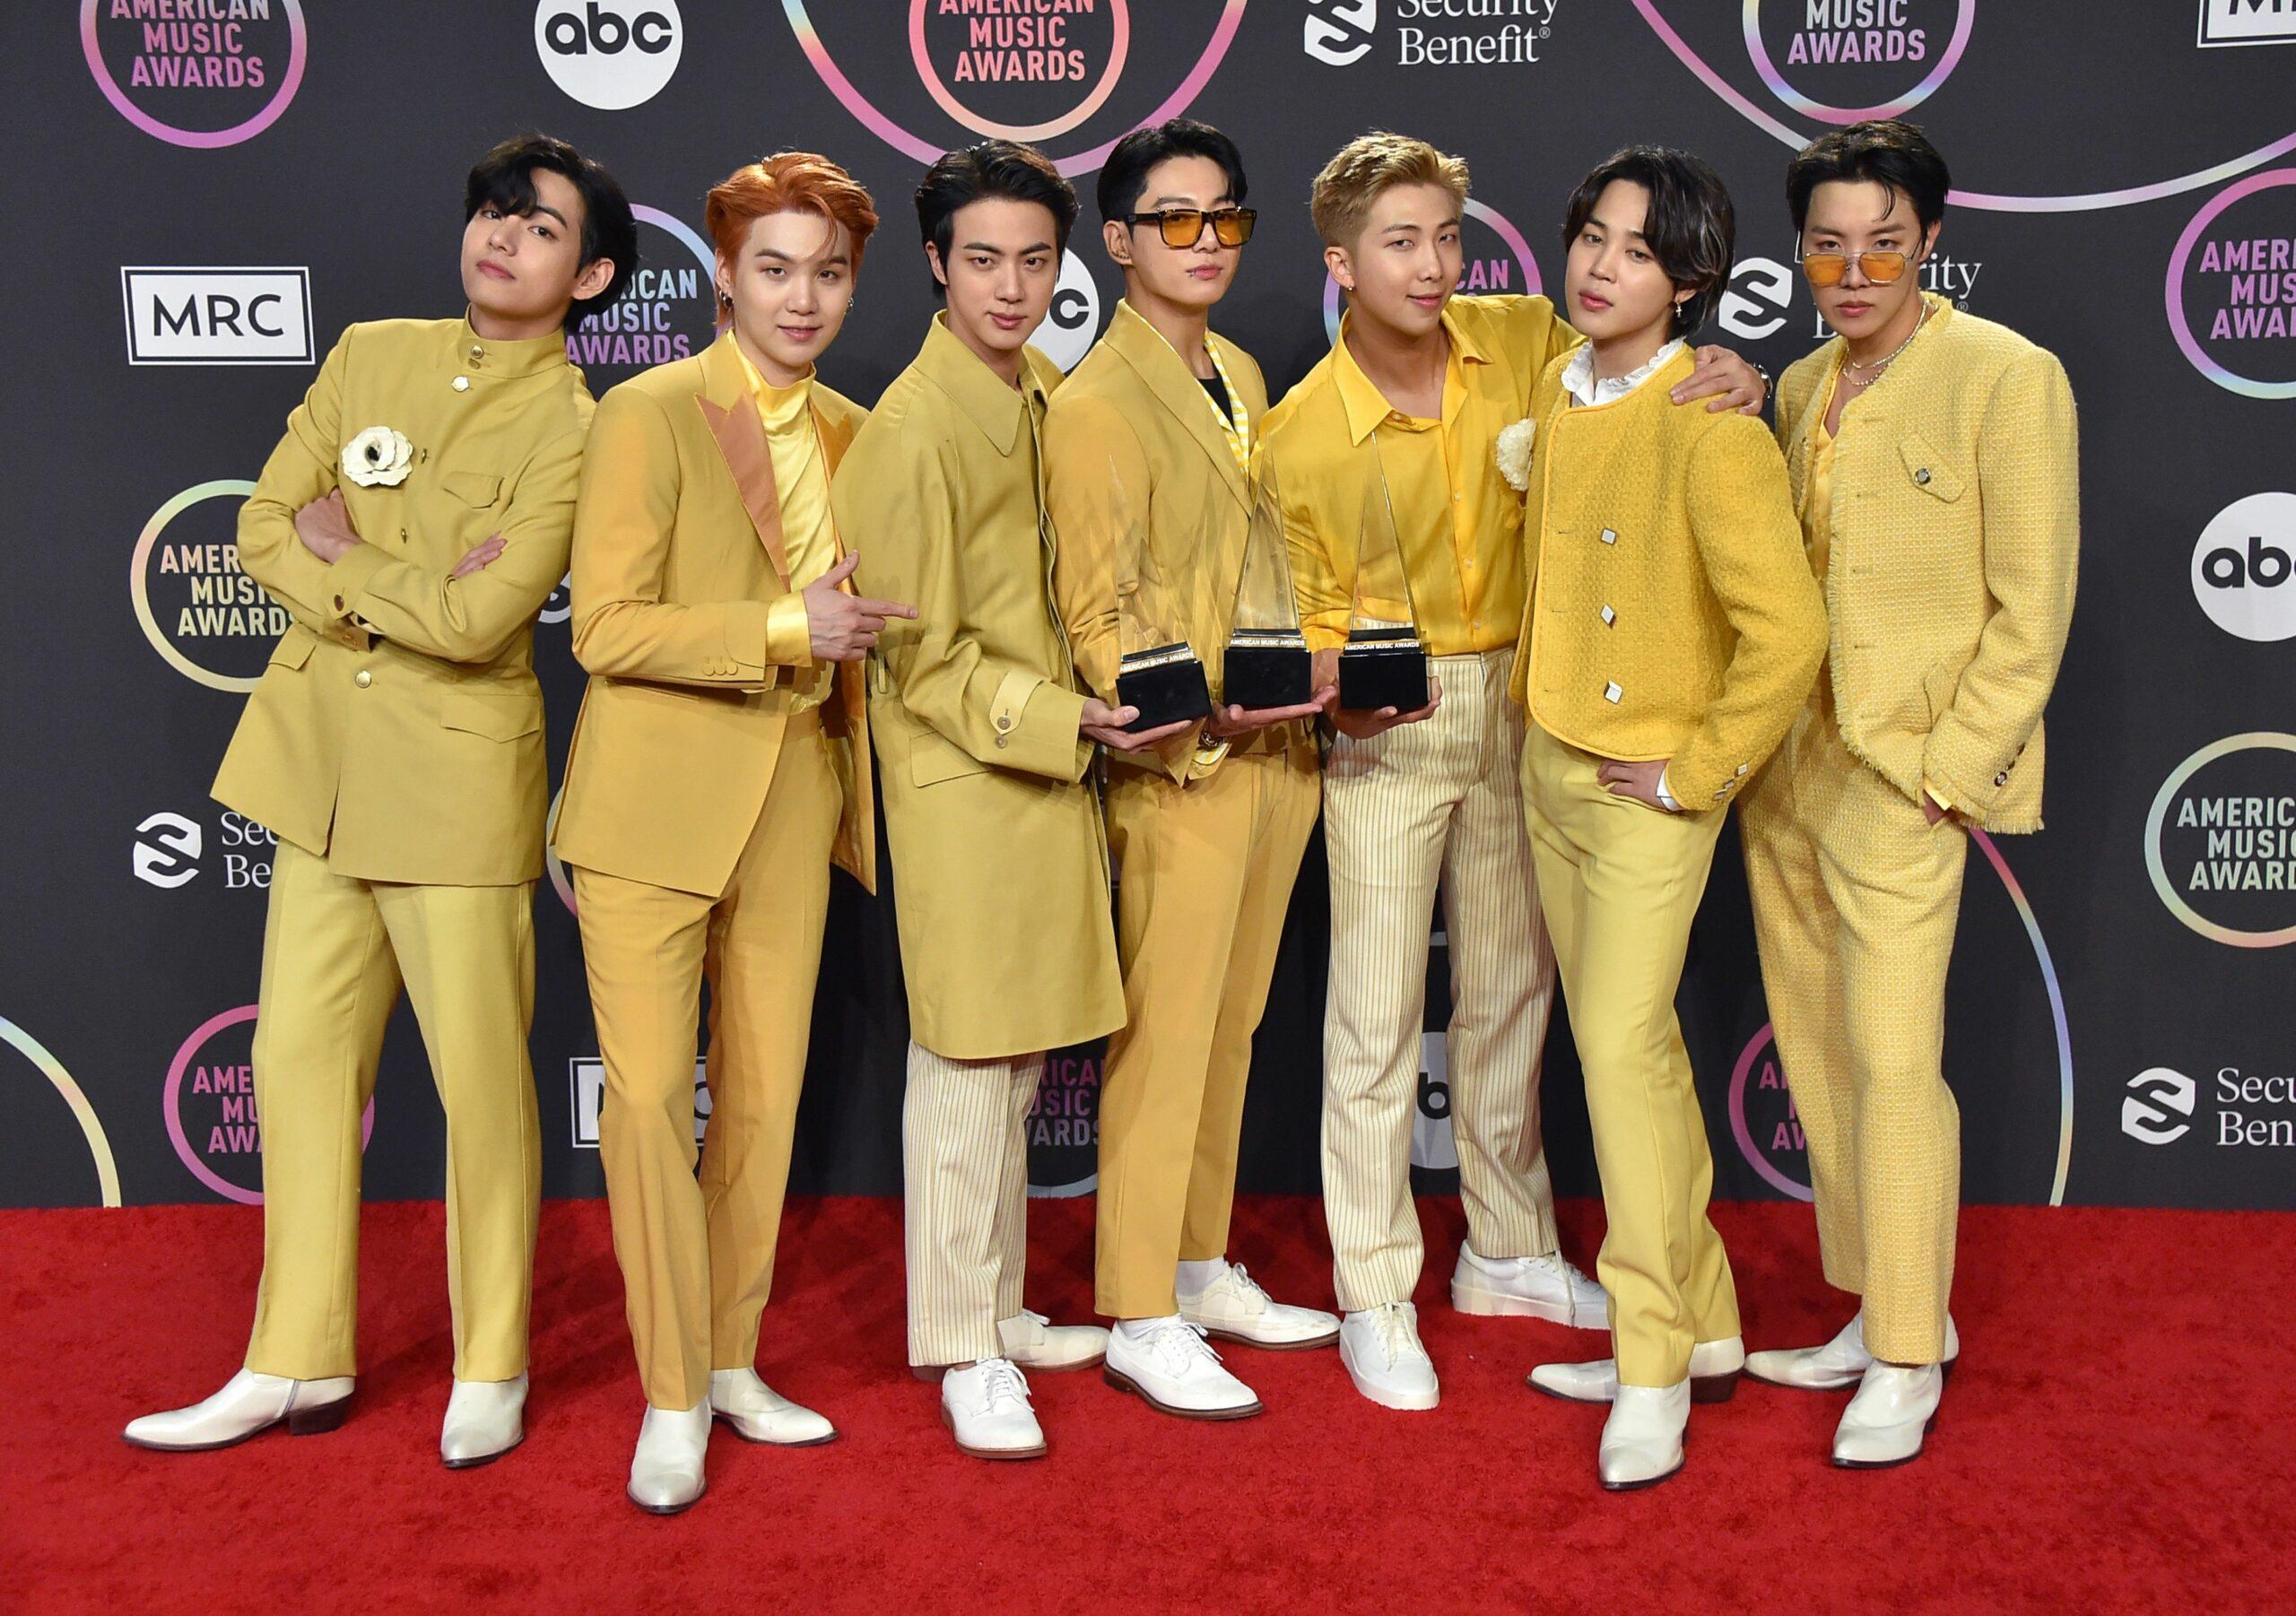 BTS on the red carpet at the 2021 AMAs